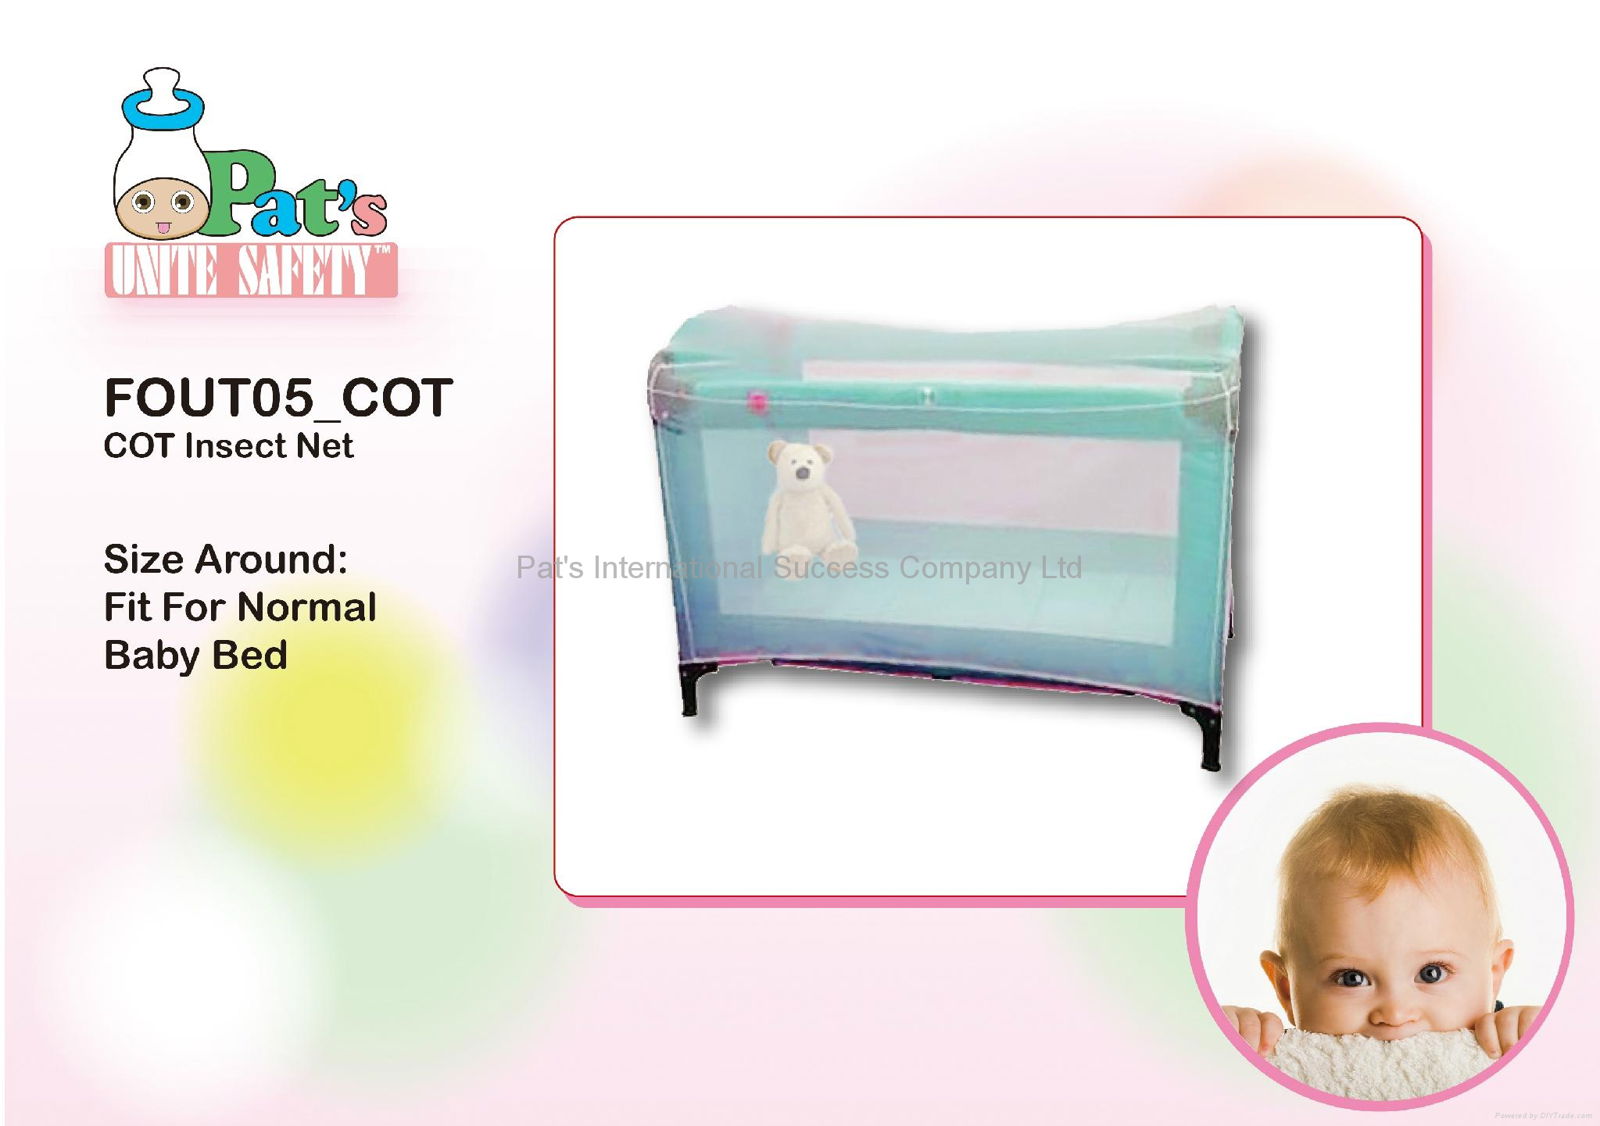 Cot Insect Net